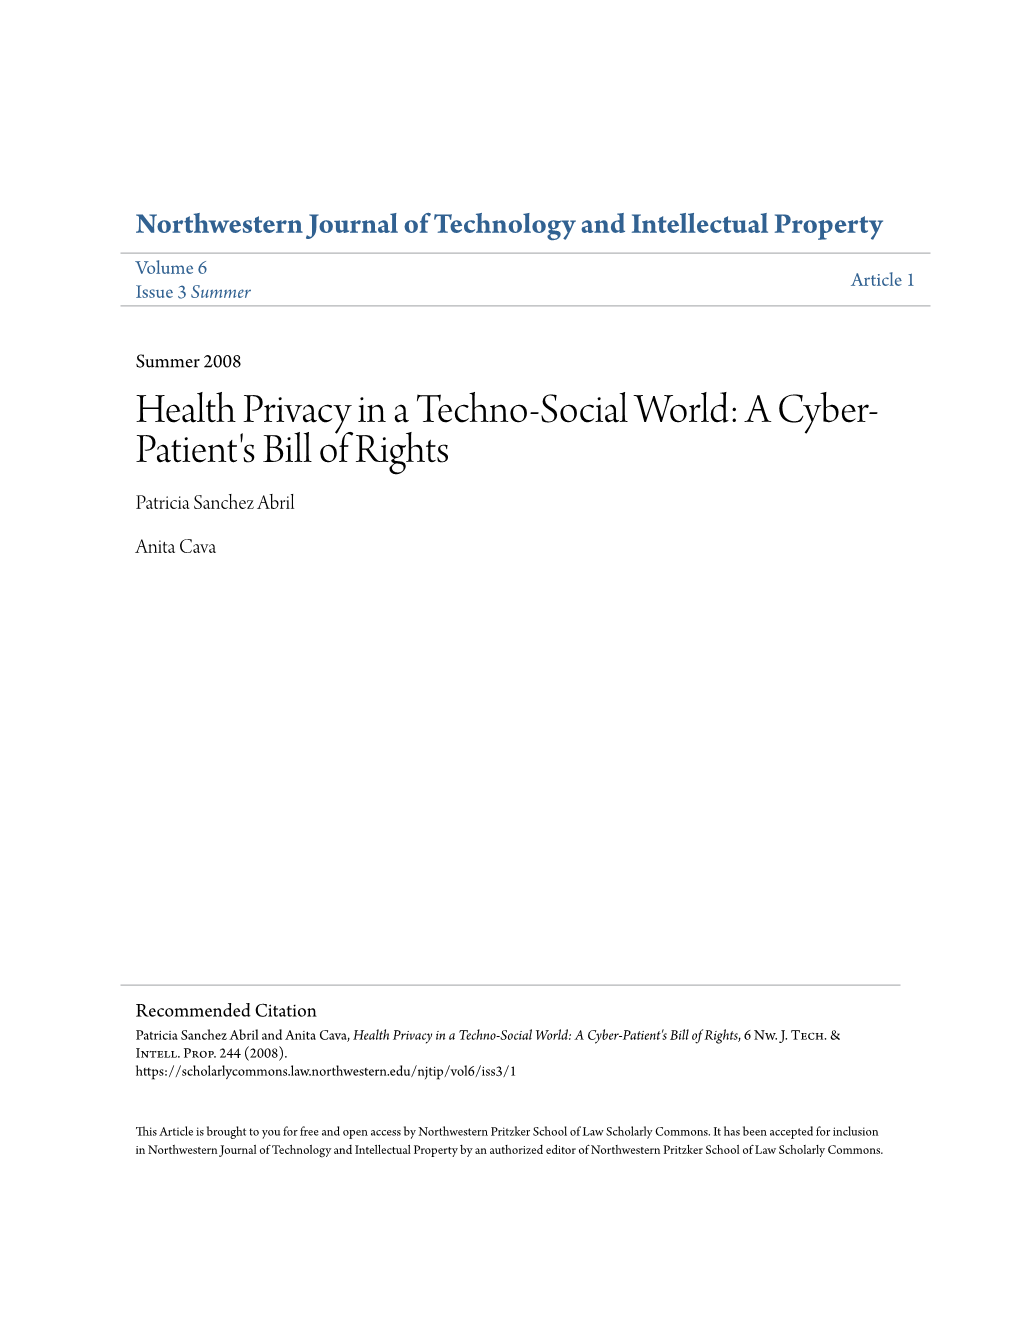 Health Privacy in a Techno-Social World: a Cyber-Patient's Bill of Rights, 6 Nw